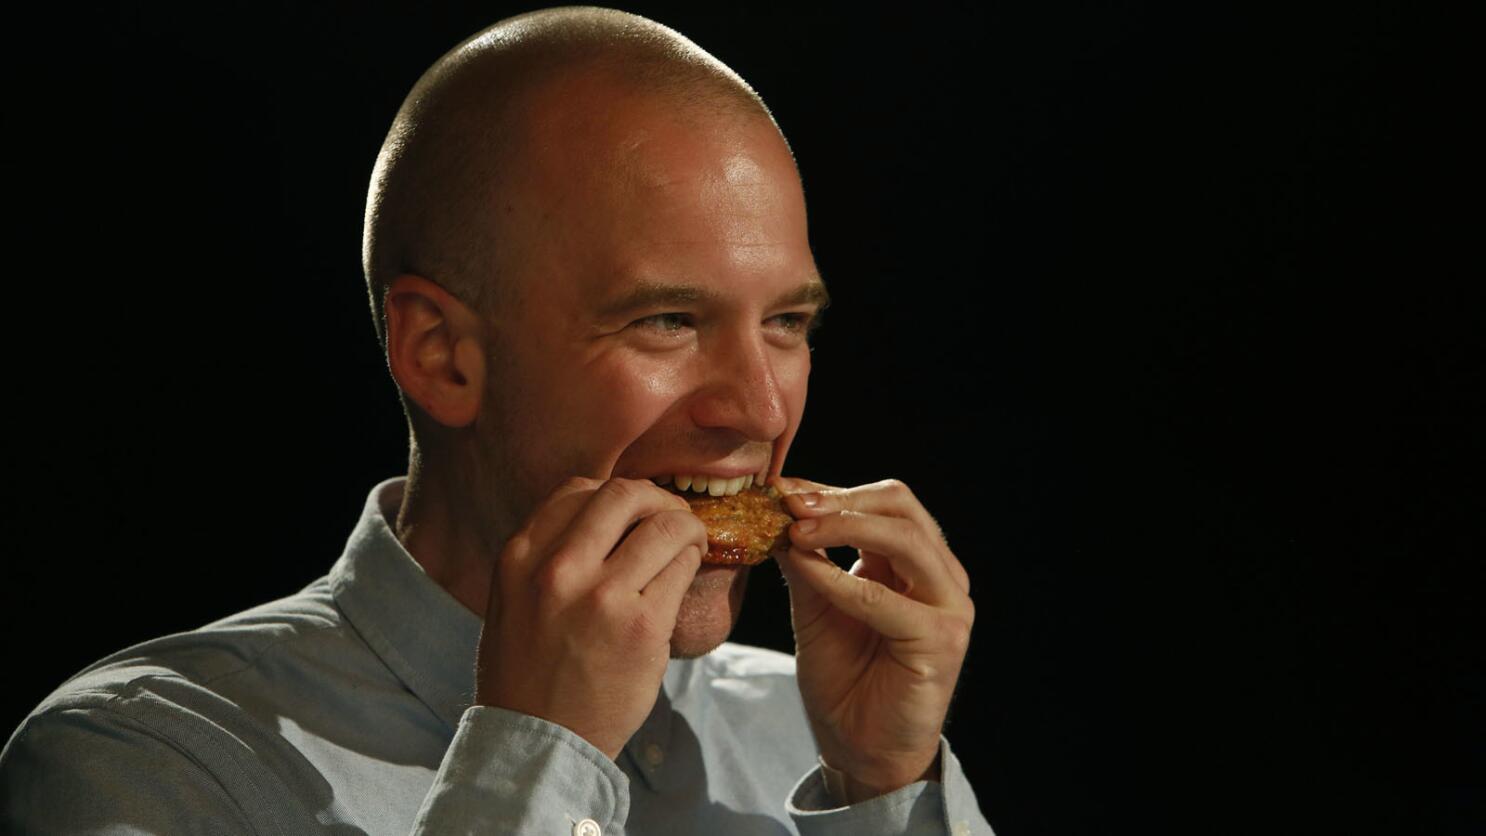 This guy eats hot wings with celebrities for a living. Seriously